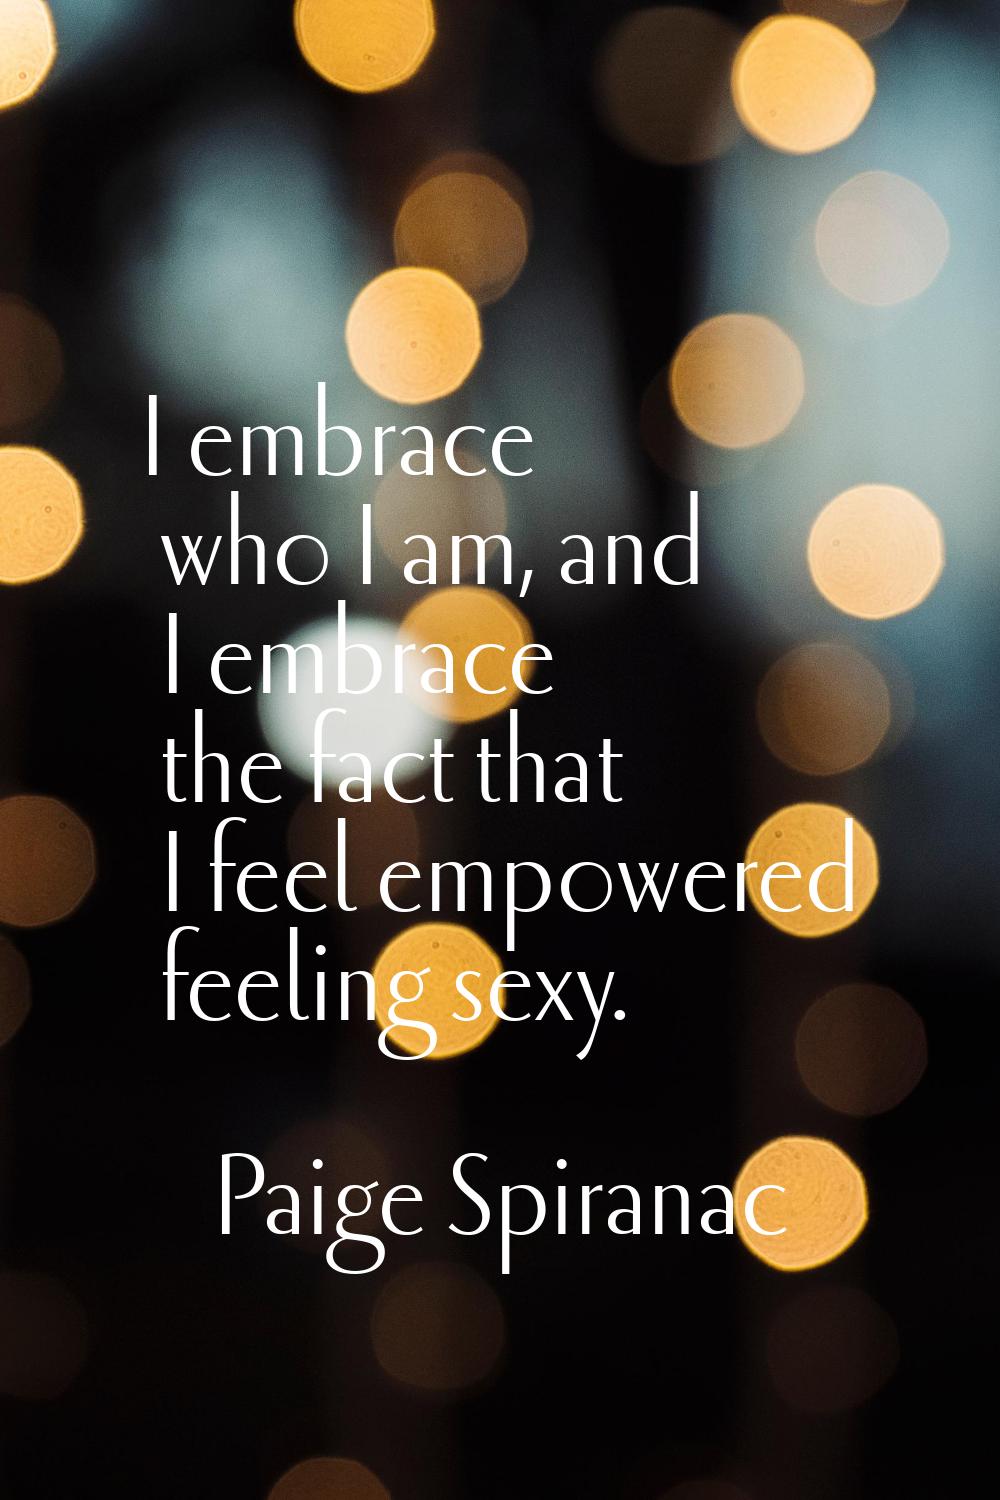 I embrace who I am, and I embrace the fact that I feel empowered feeling sexy.